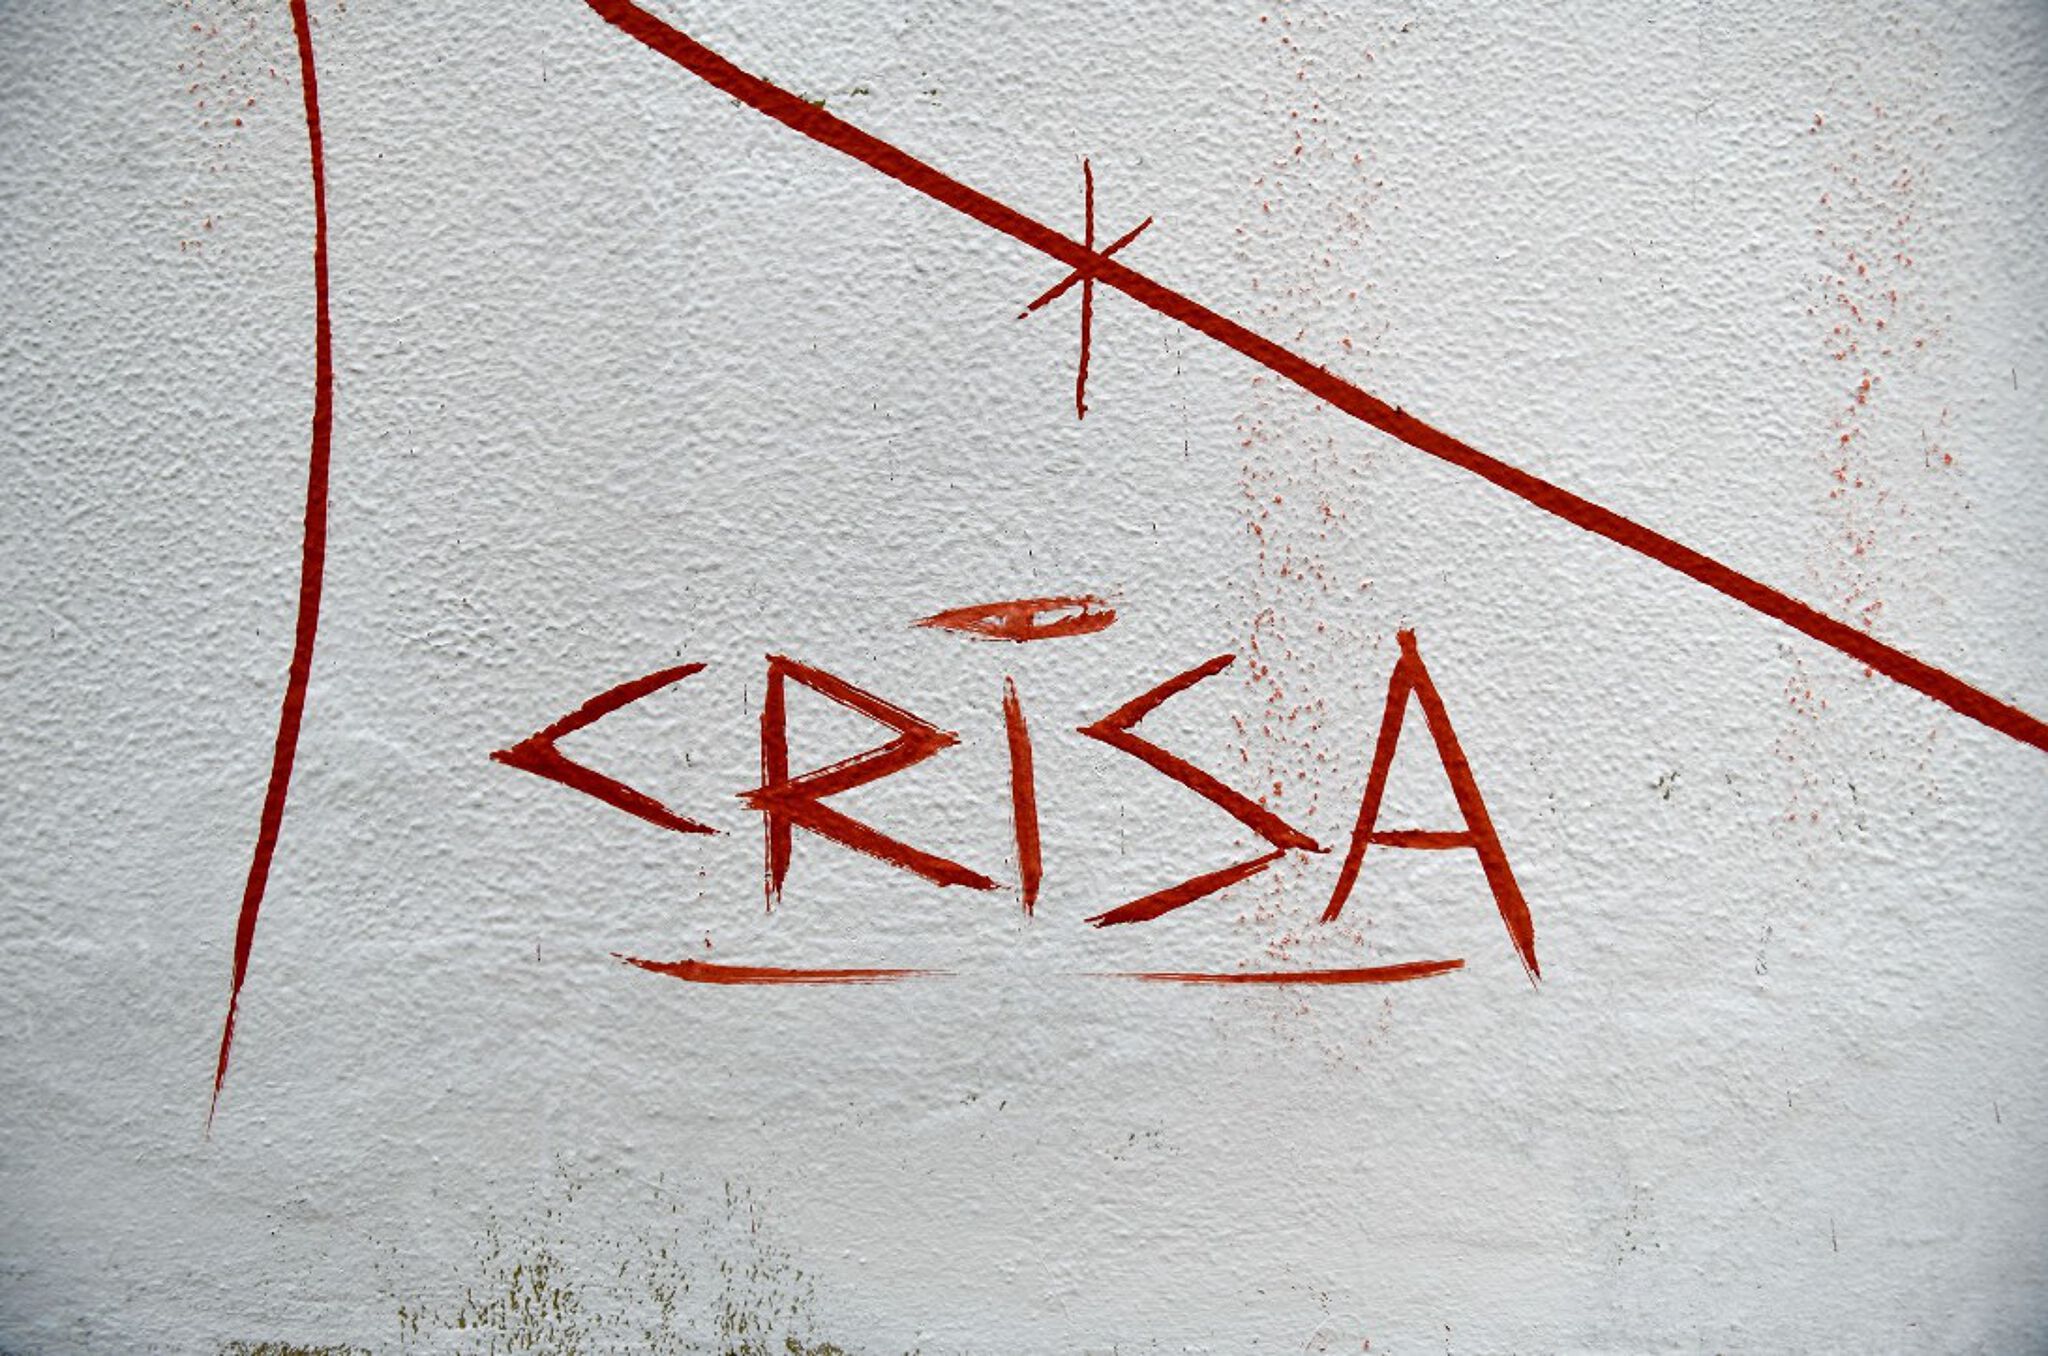 Crisa&mdash;With a little help from our friends